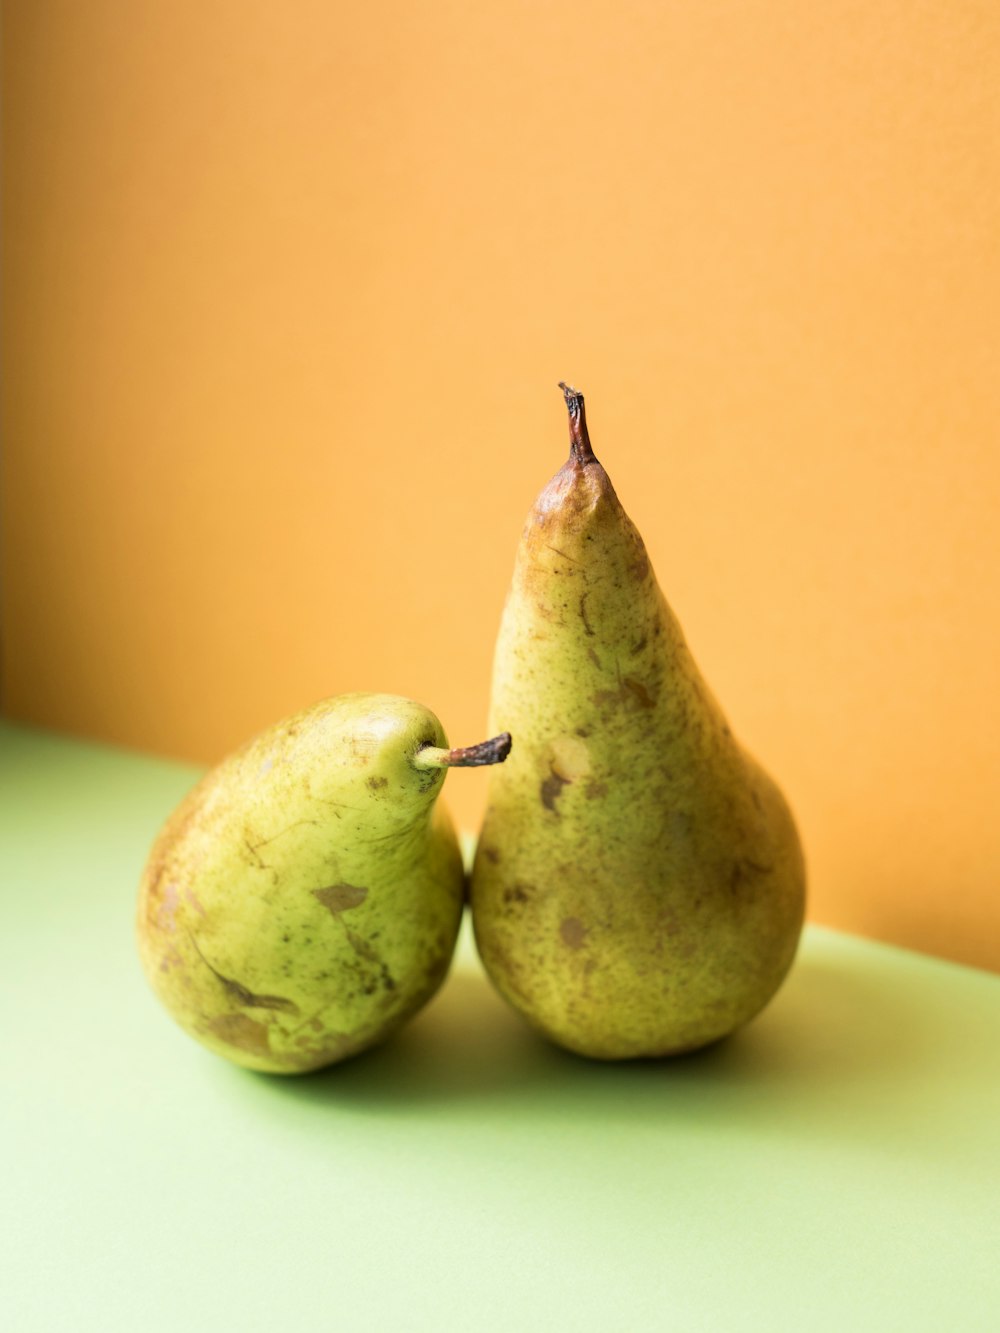 two green fruits on yellow surface